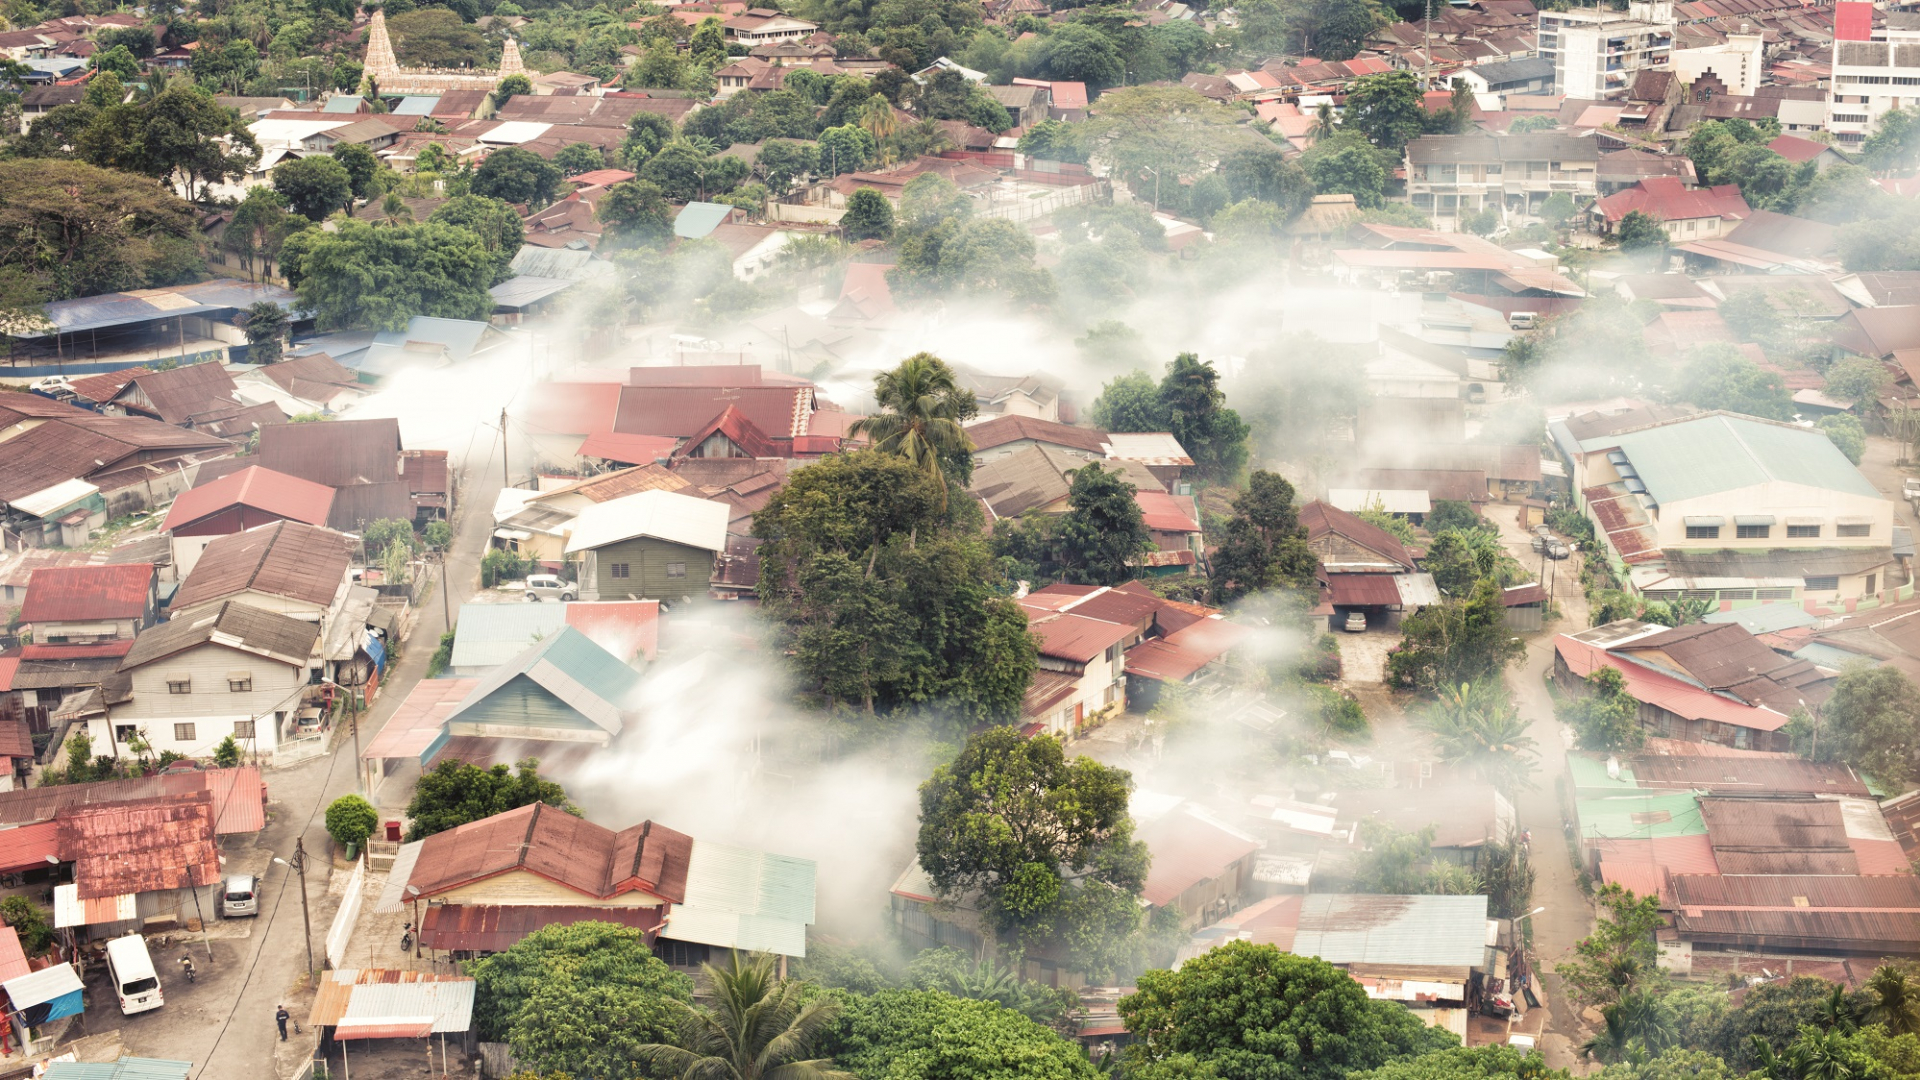 Mosquito fogging in countryside of Penang, Malaysia.